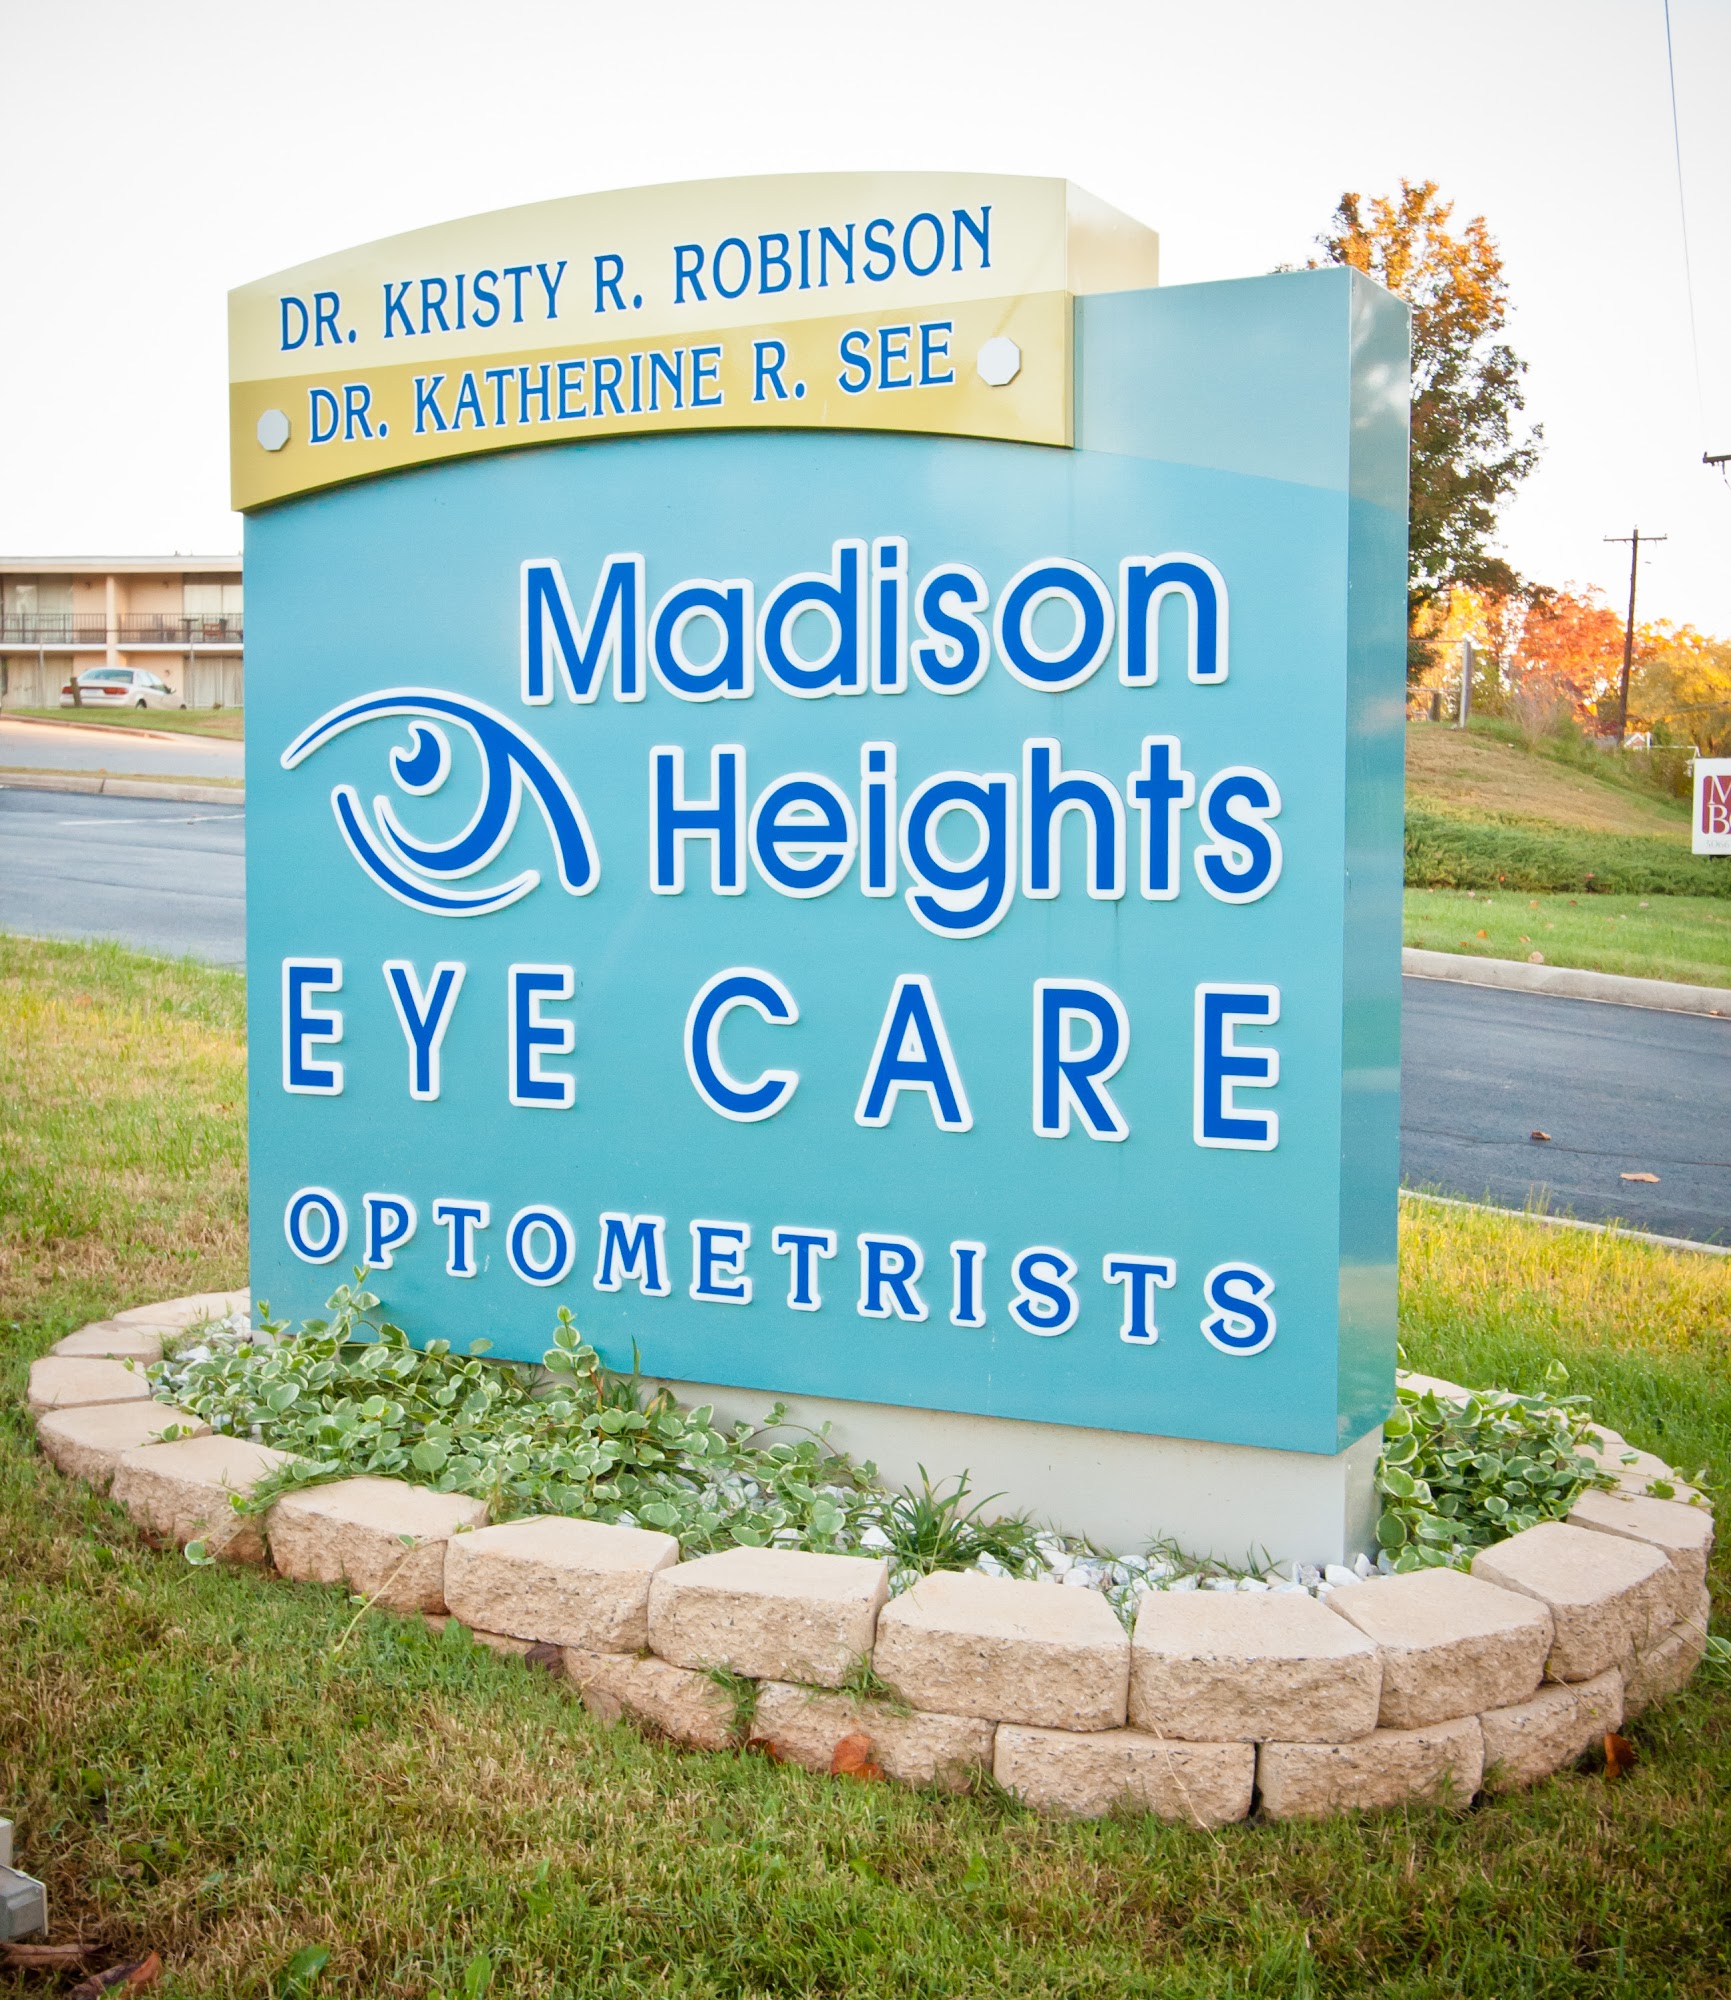 Madison Heights Eye Care PC - Optometrists 5076 S Amherst Hwy, Madison Heights Virginia 24572